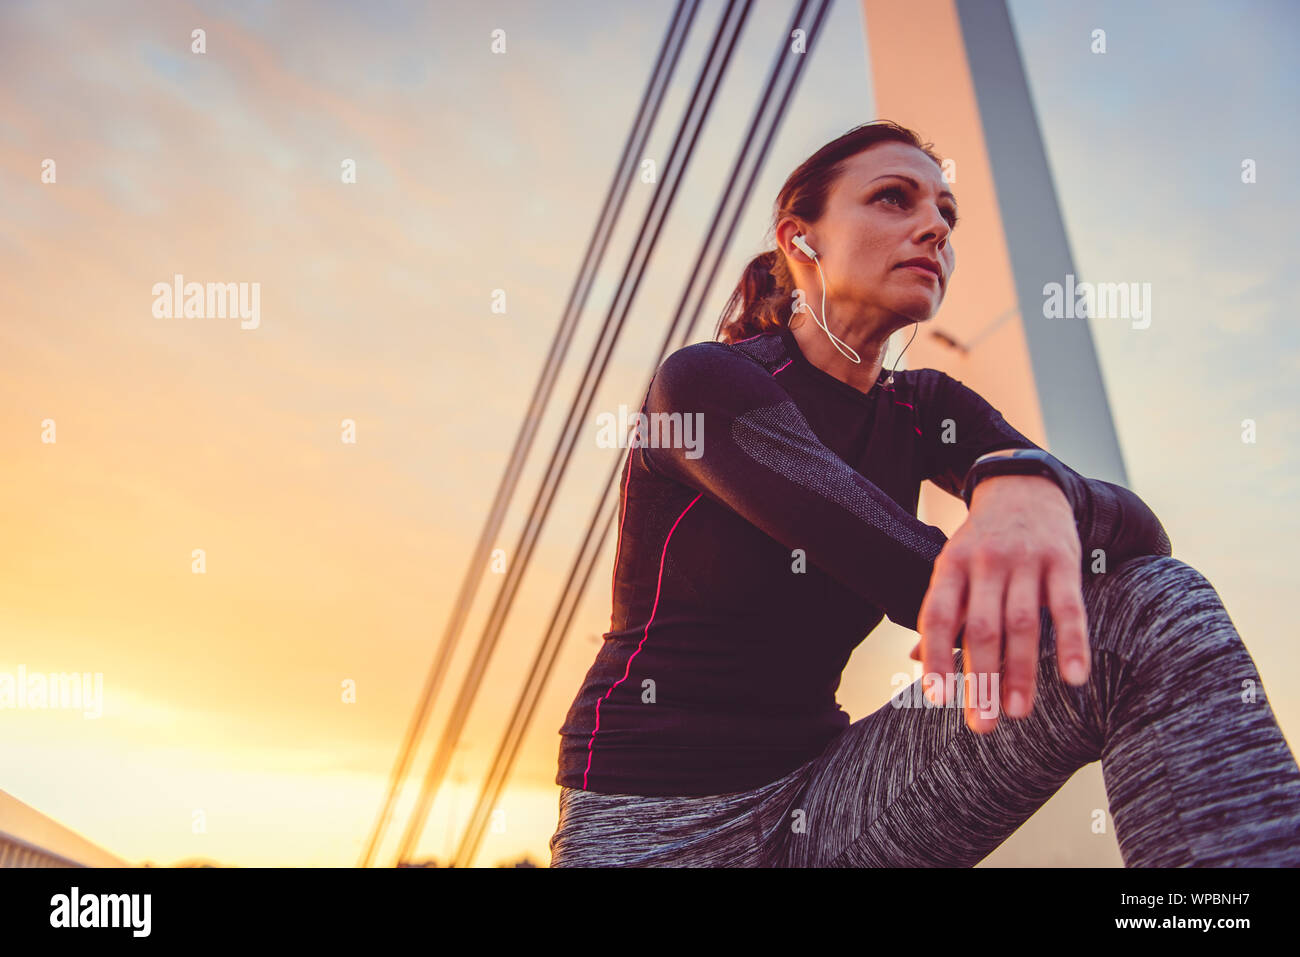 Portrait of fitness women resting after running Stock Photo